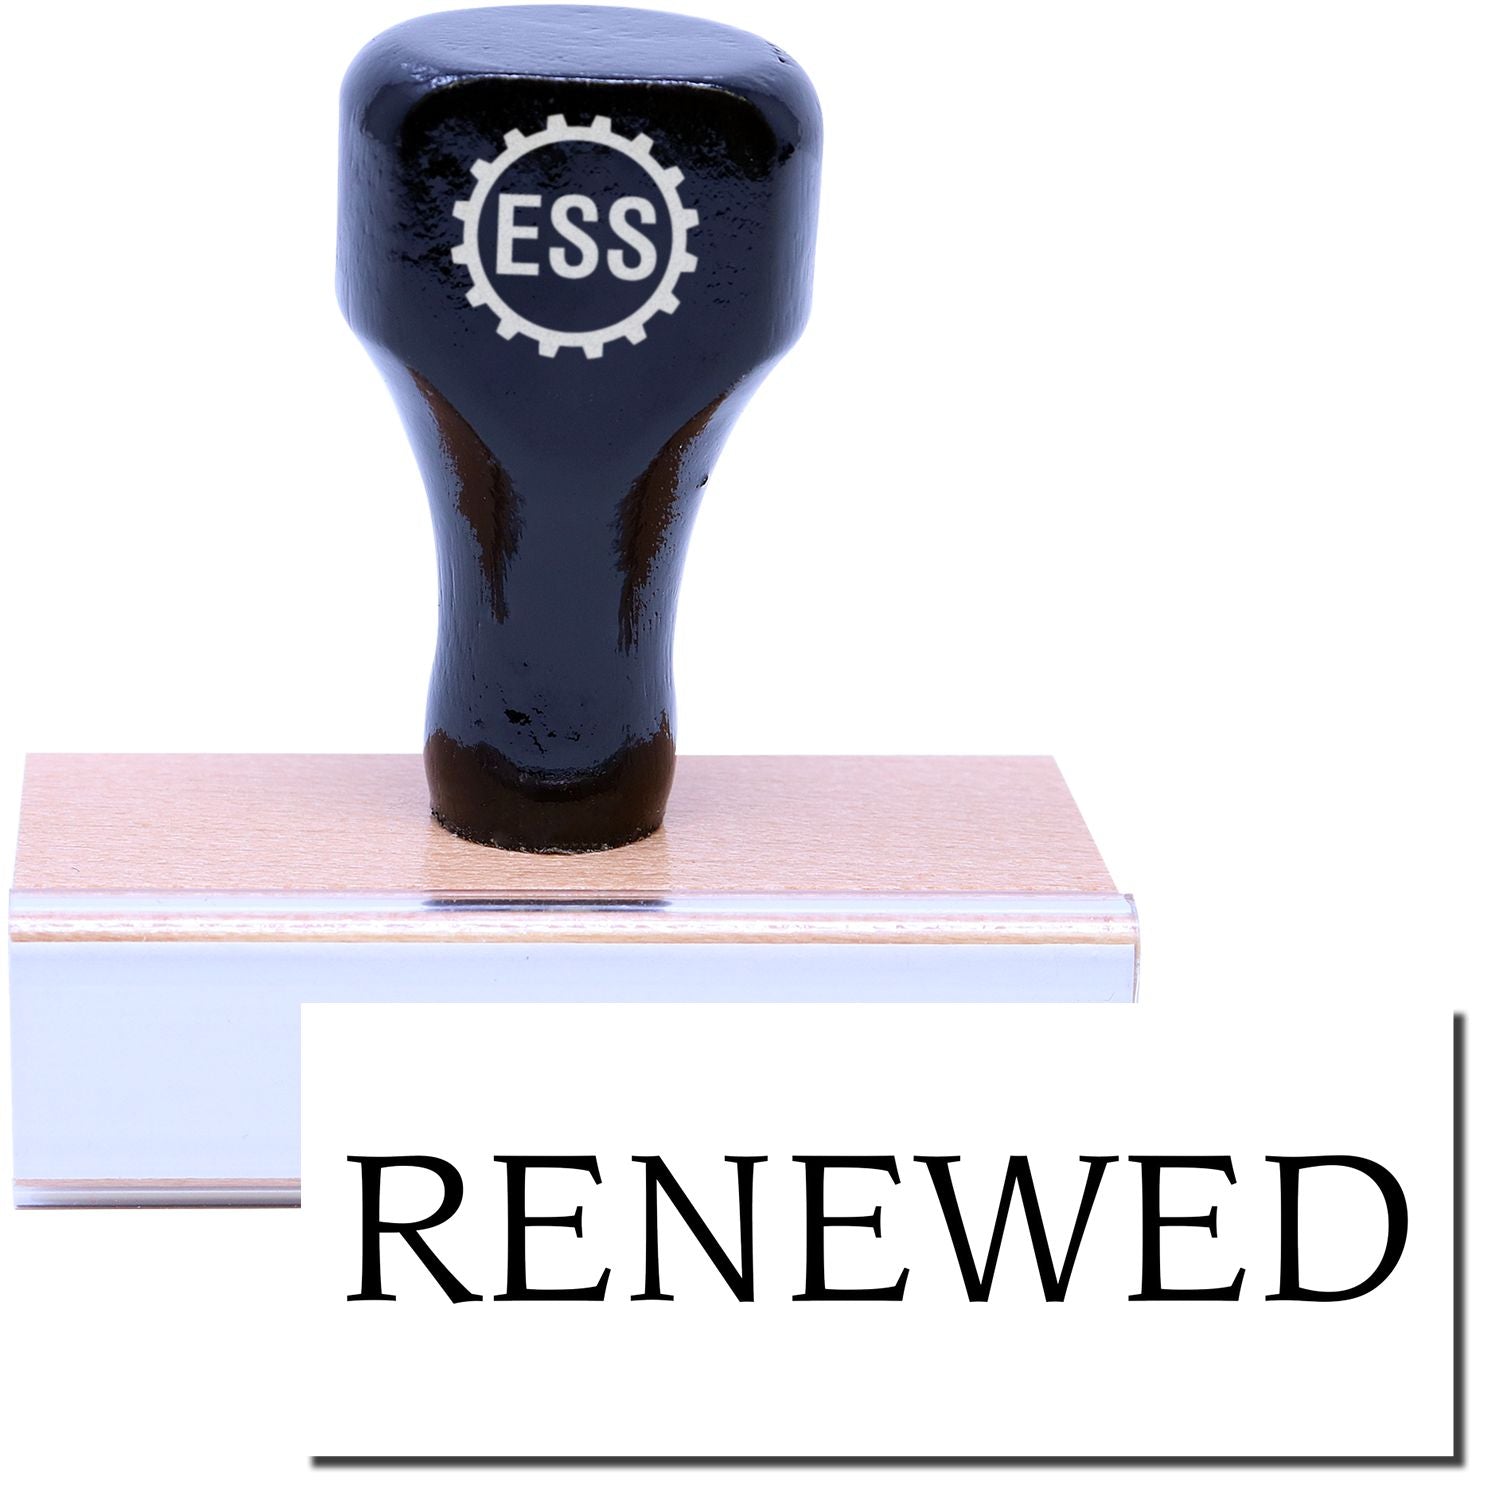 A stock office rubber stamp with a stamped image showing how the text "RENEWED" in a large font is displayed after stamping.